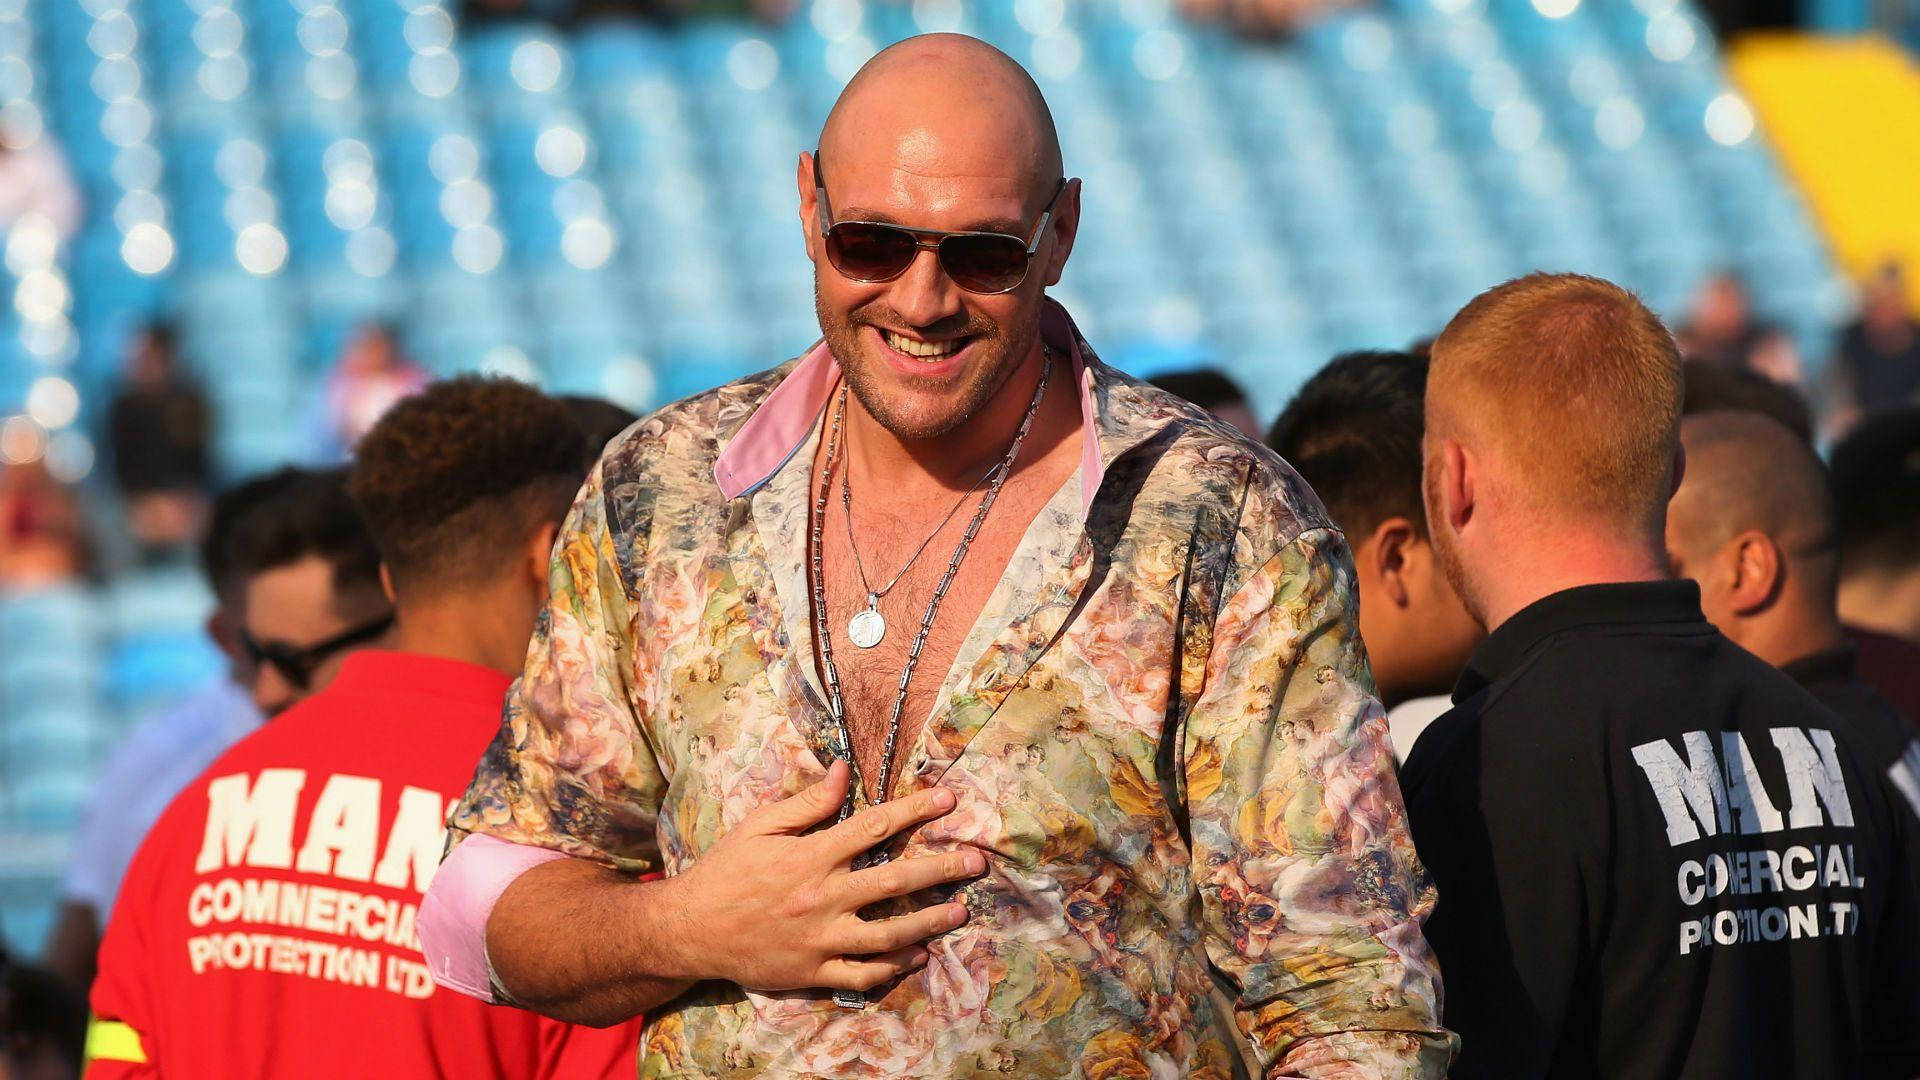 Tyson Fury As Cheerful Person